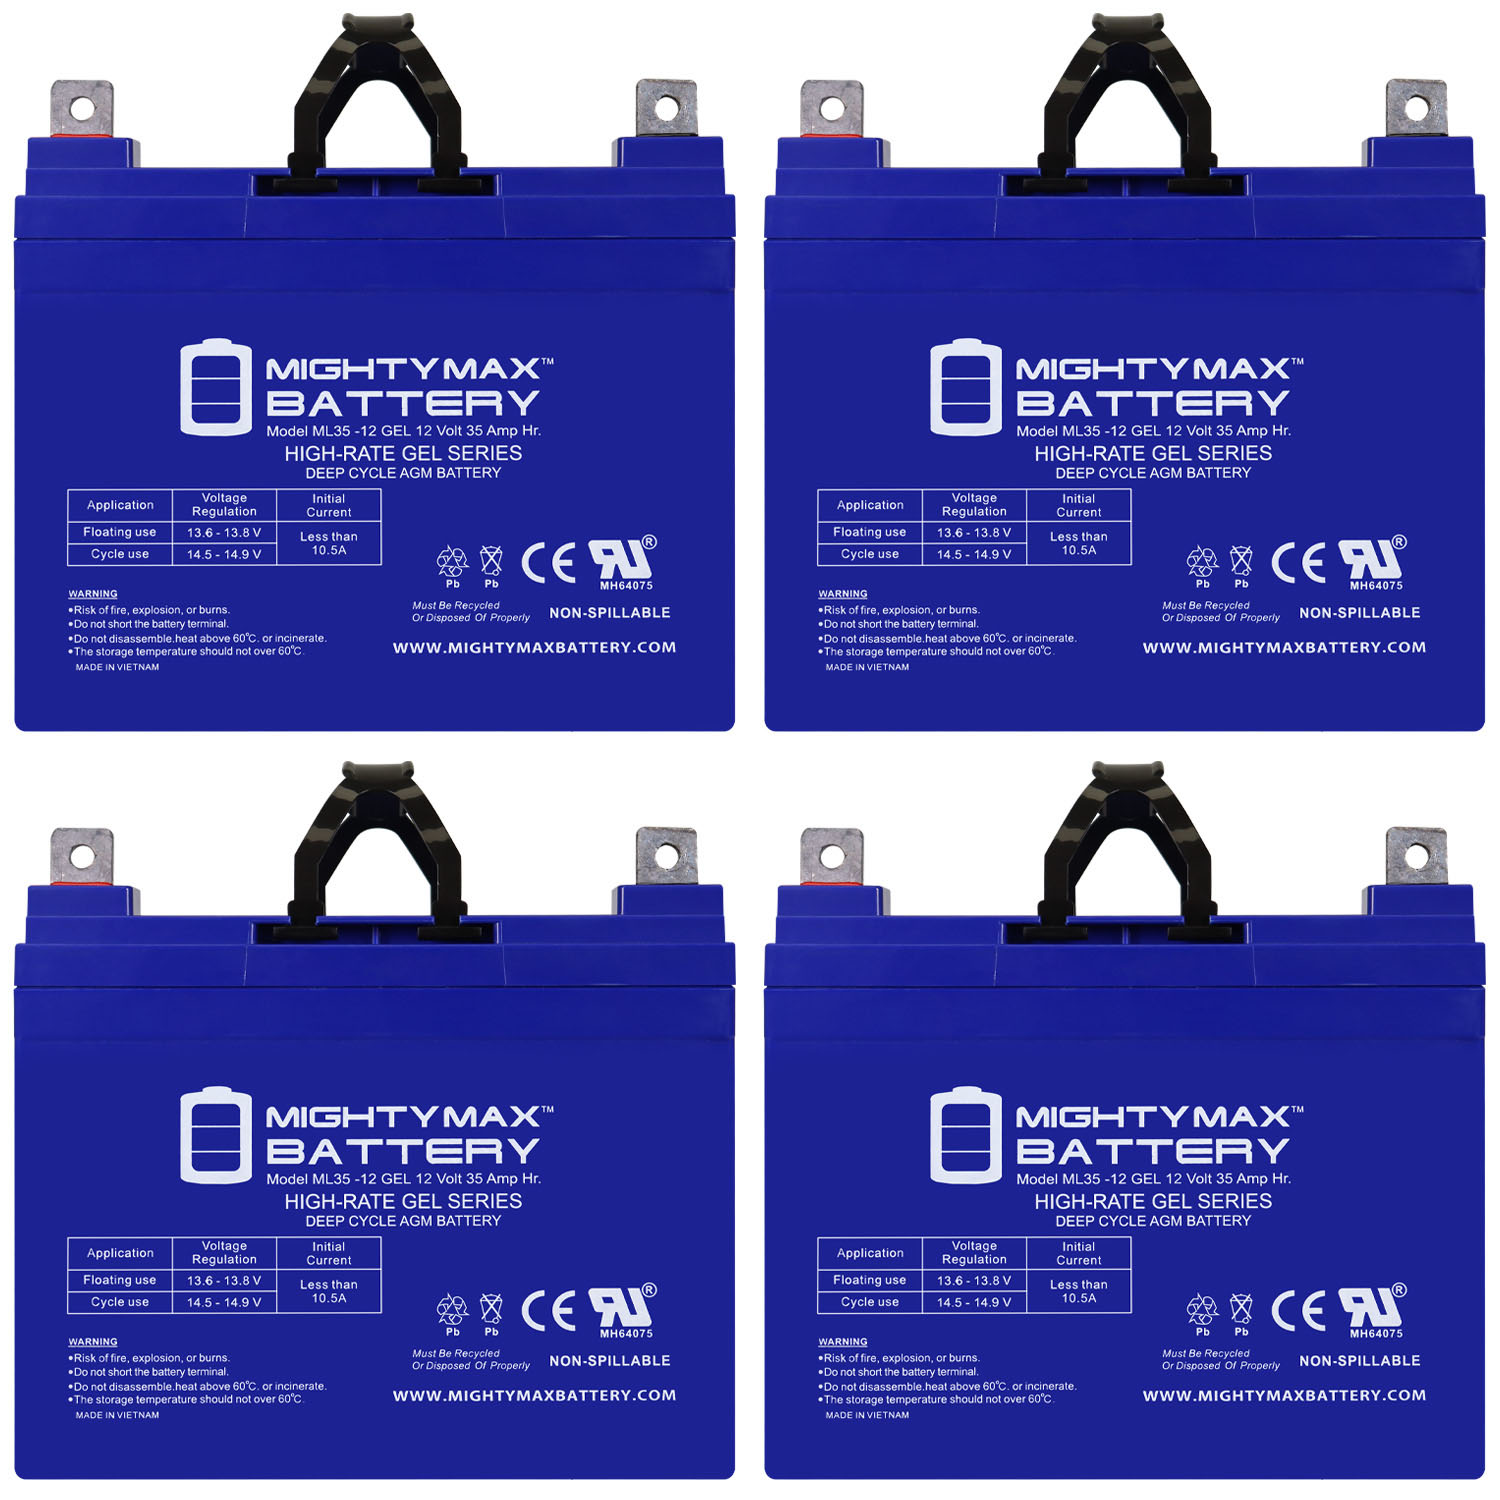 12V 35AH GEL NB Replacement Battery Compatible with Pride Mobility BATLIQ1017 - 4 Pack